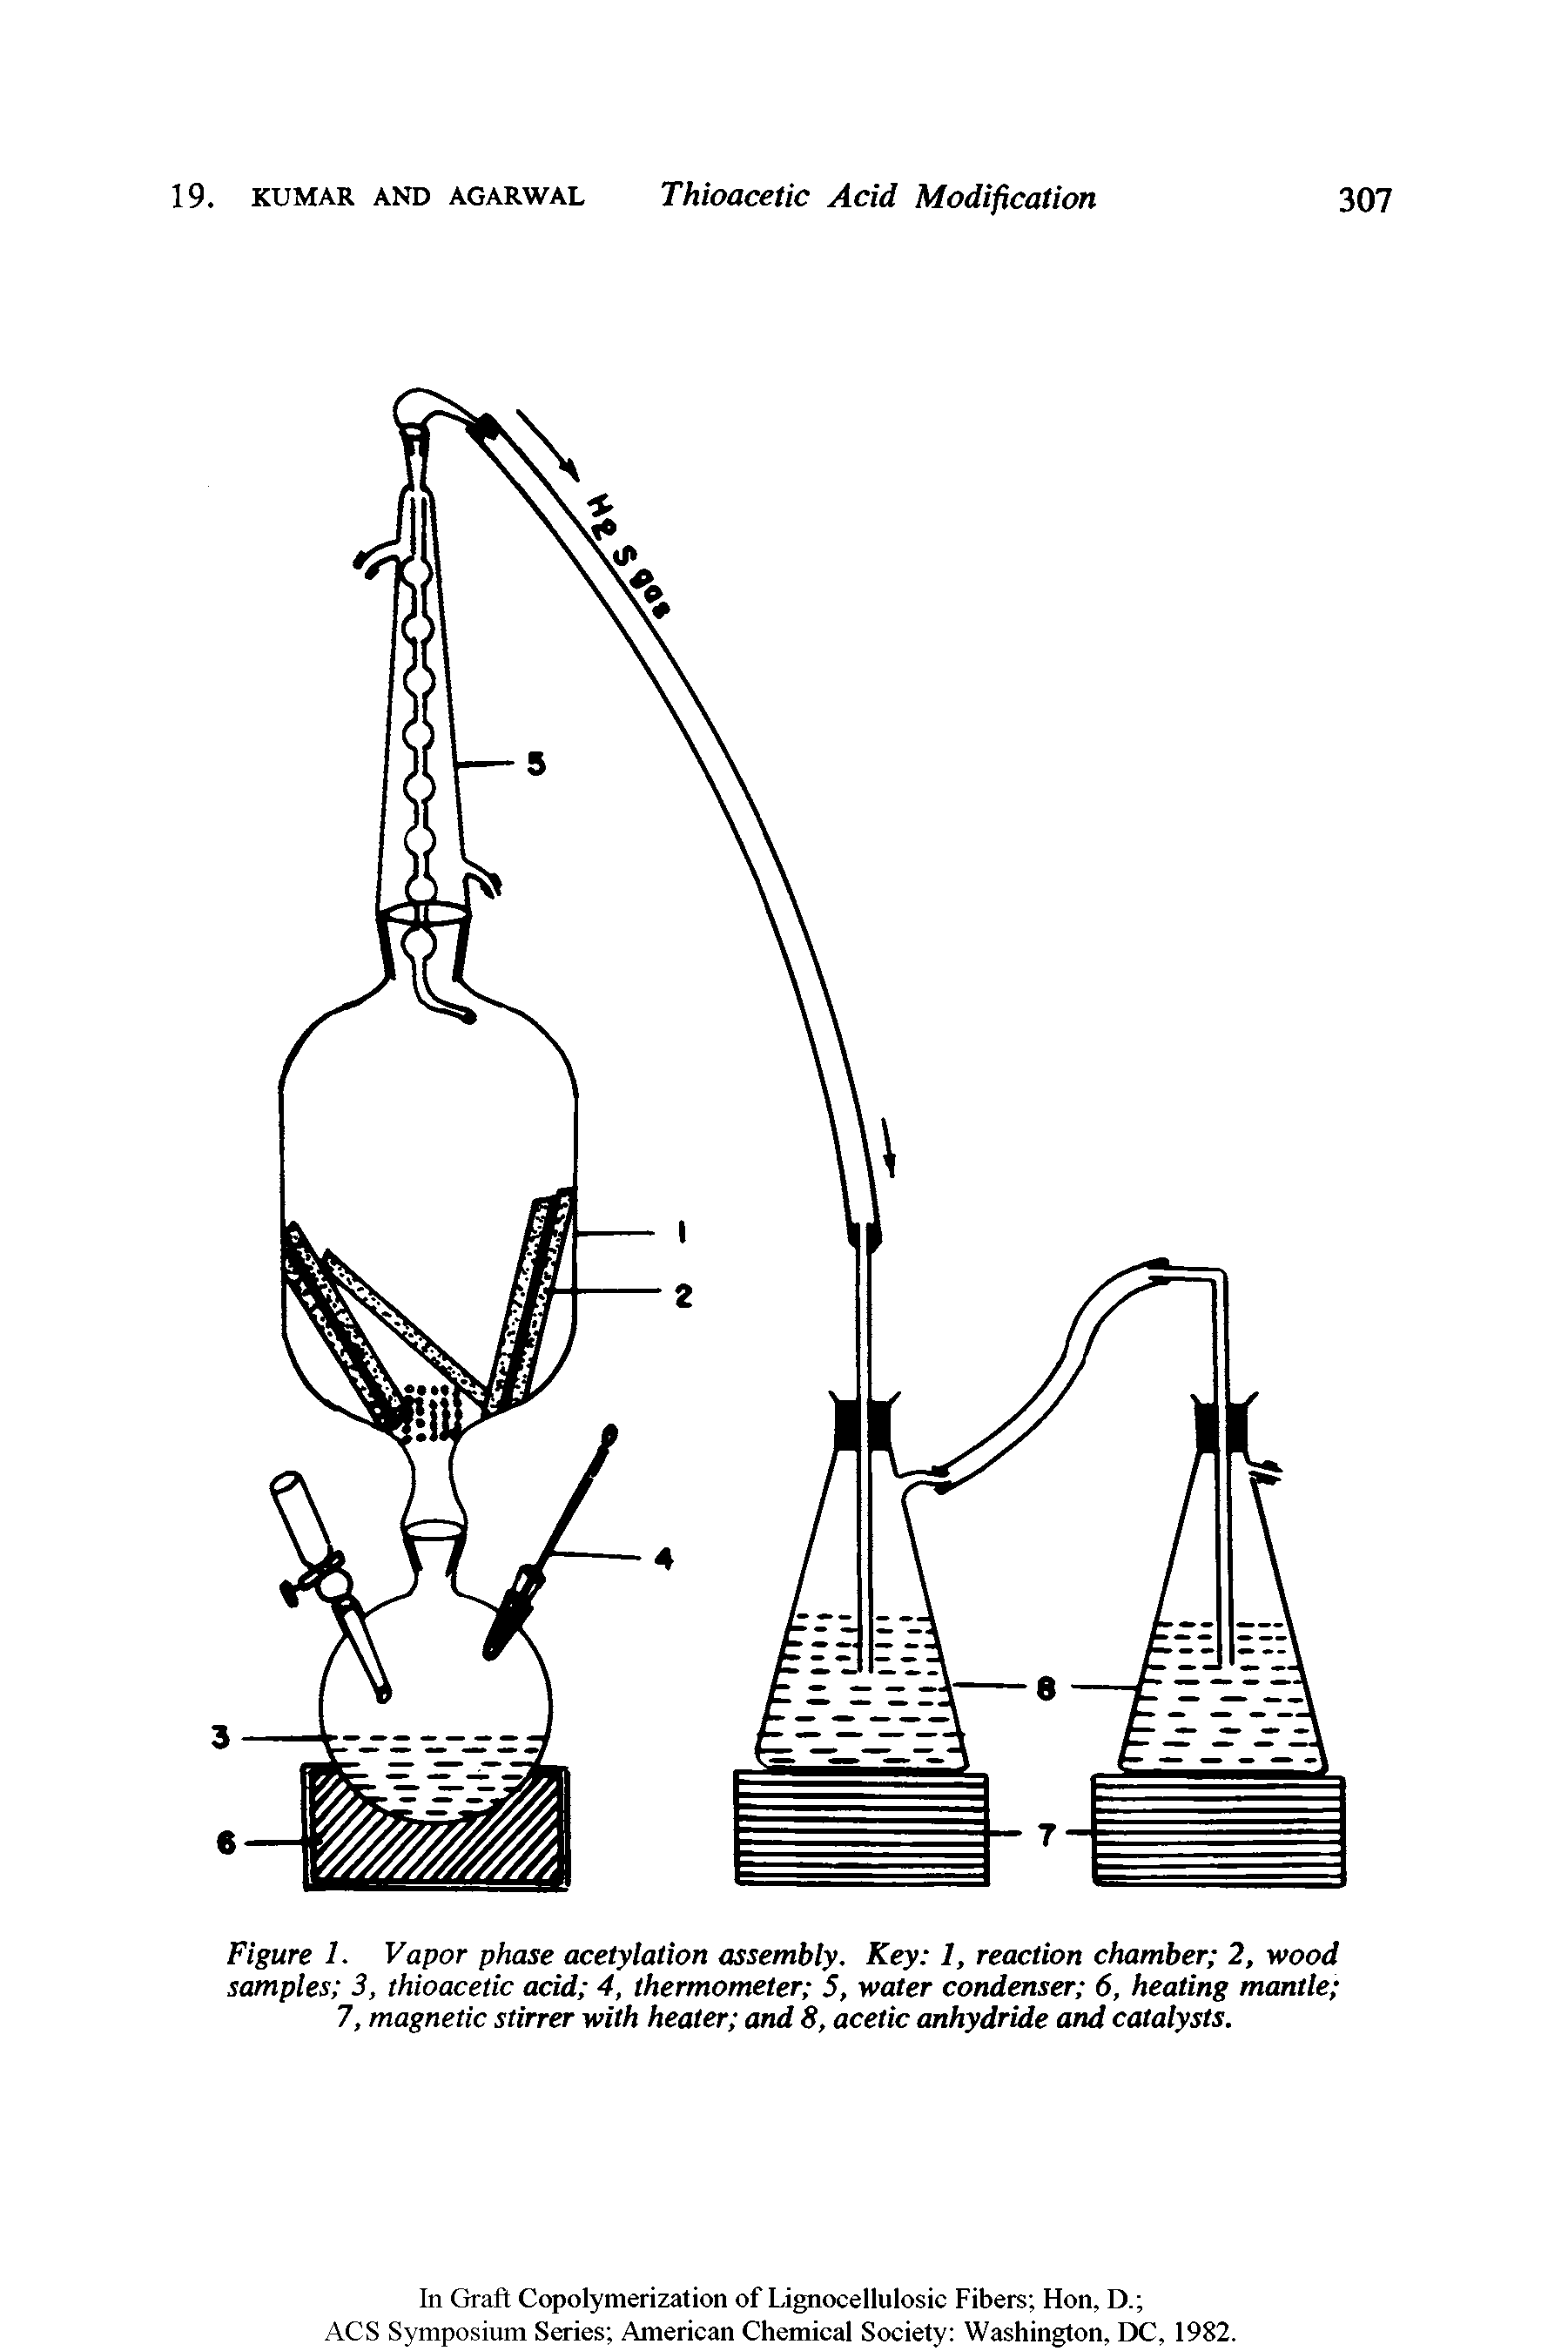 Figure 1. Vapor phase acetylation assembly. Key 1, reaction chamber 2, wood samples 3, thioacetic acid 4, thermometer 5, water condenser 6, heating mantle 7, magnetic stirrer with heater and 8, acetic anhydride and catalysts.